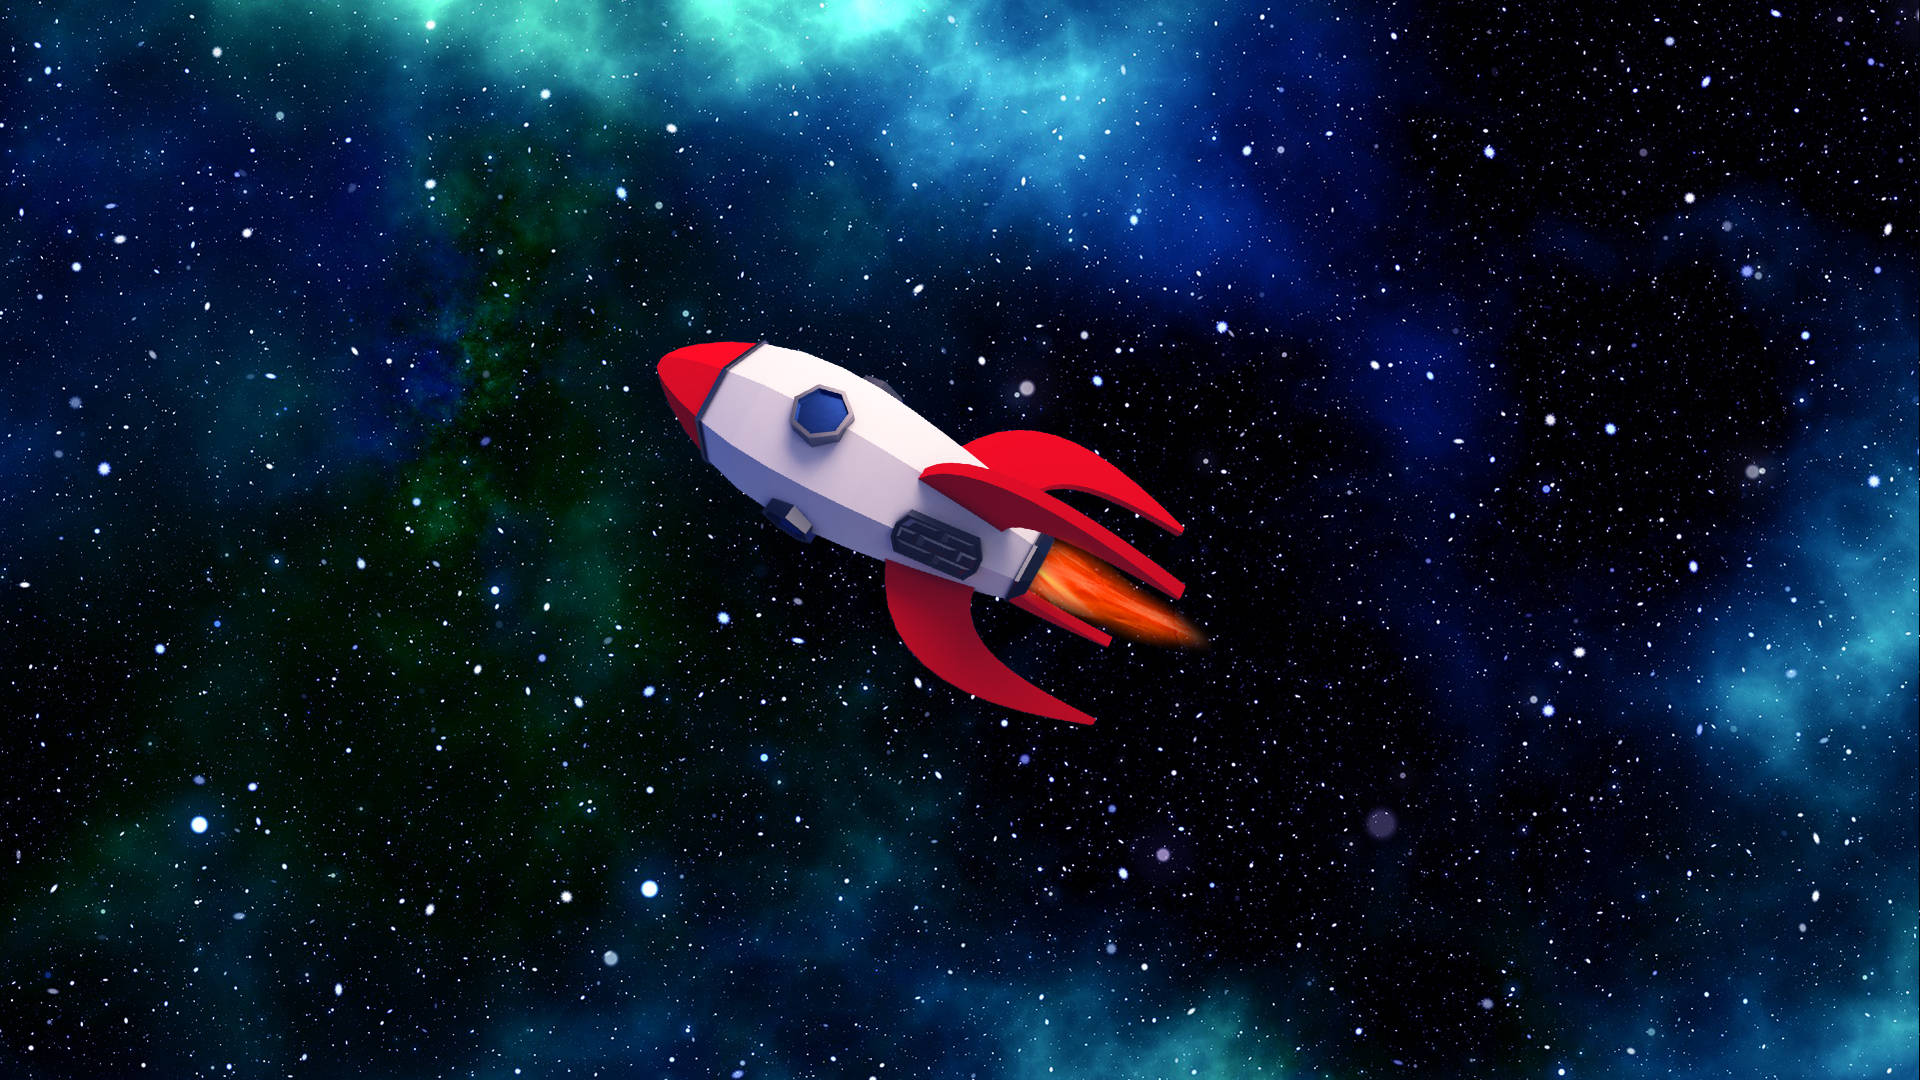 Low Poly Rocket In Space Background